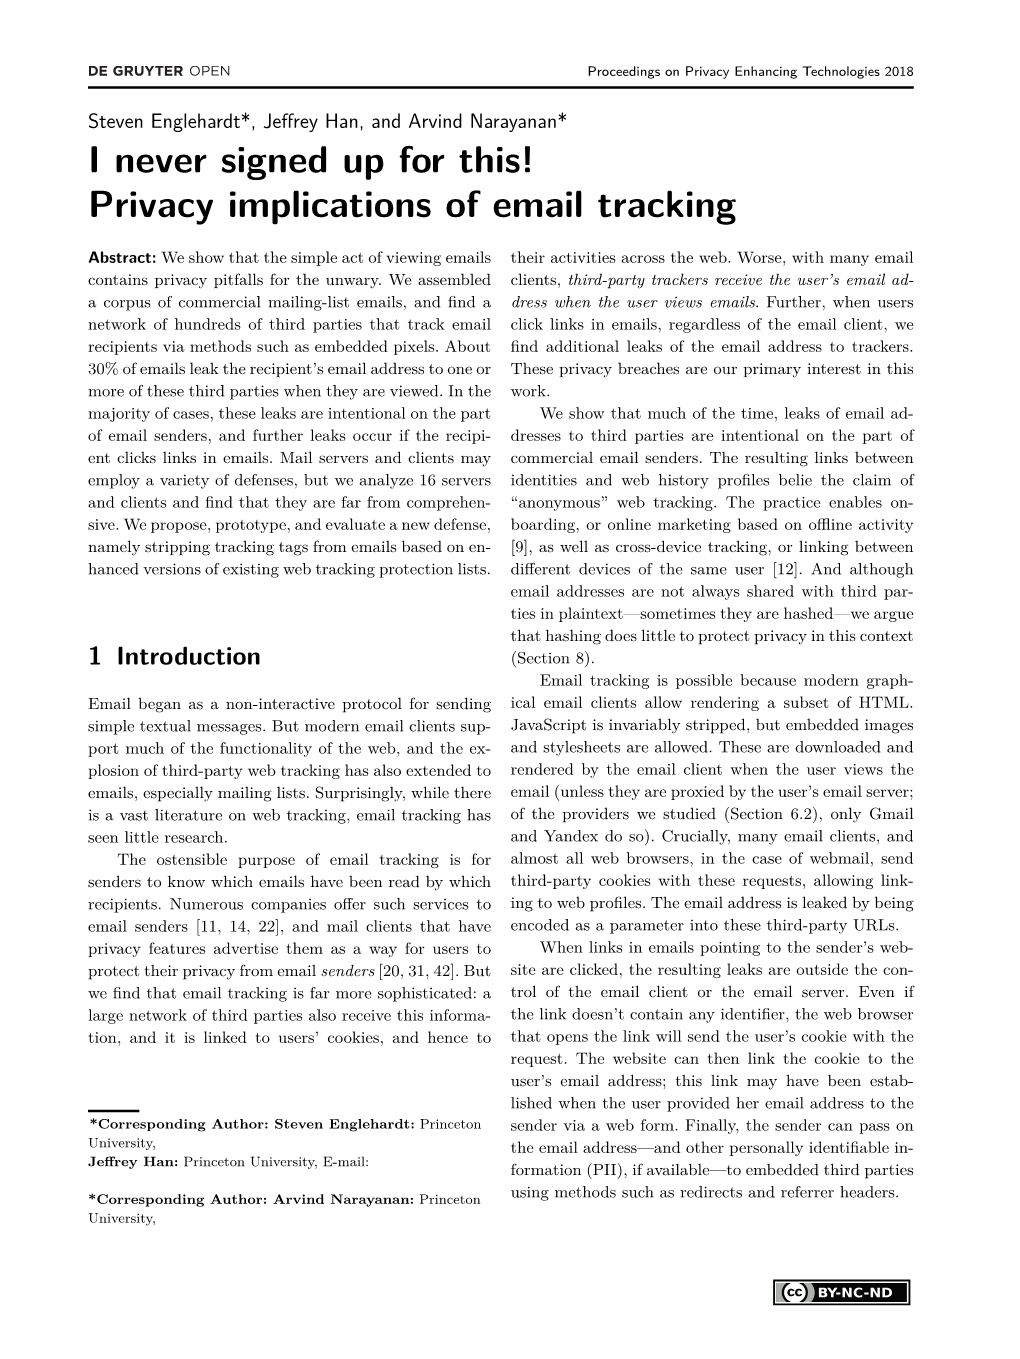 I Never Signed up for This! Privacy Implications of Email Tracking